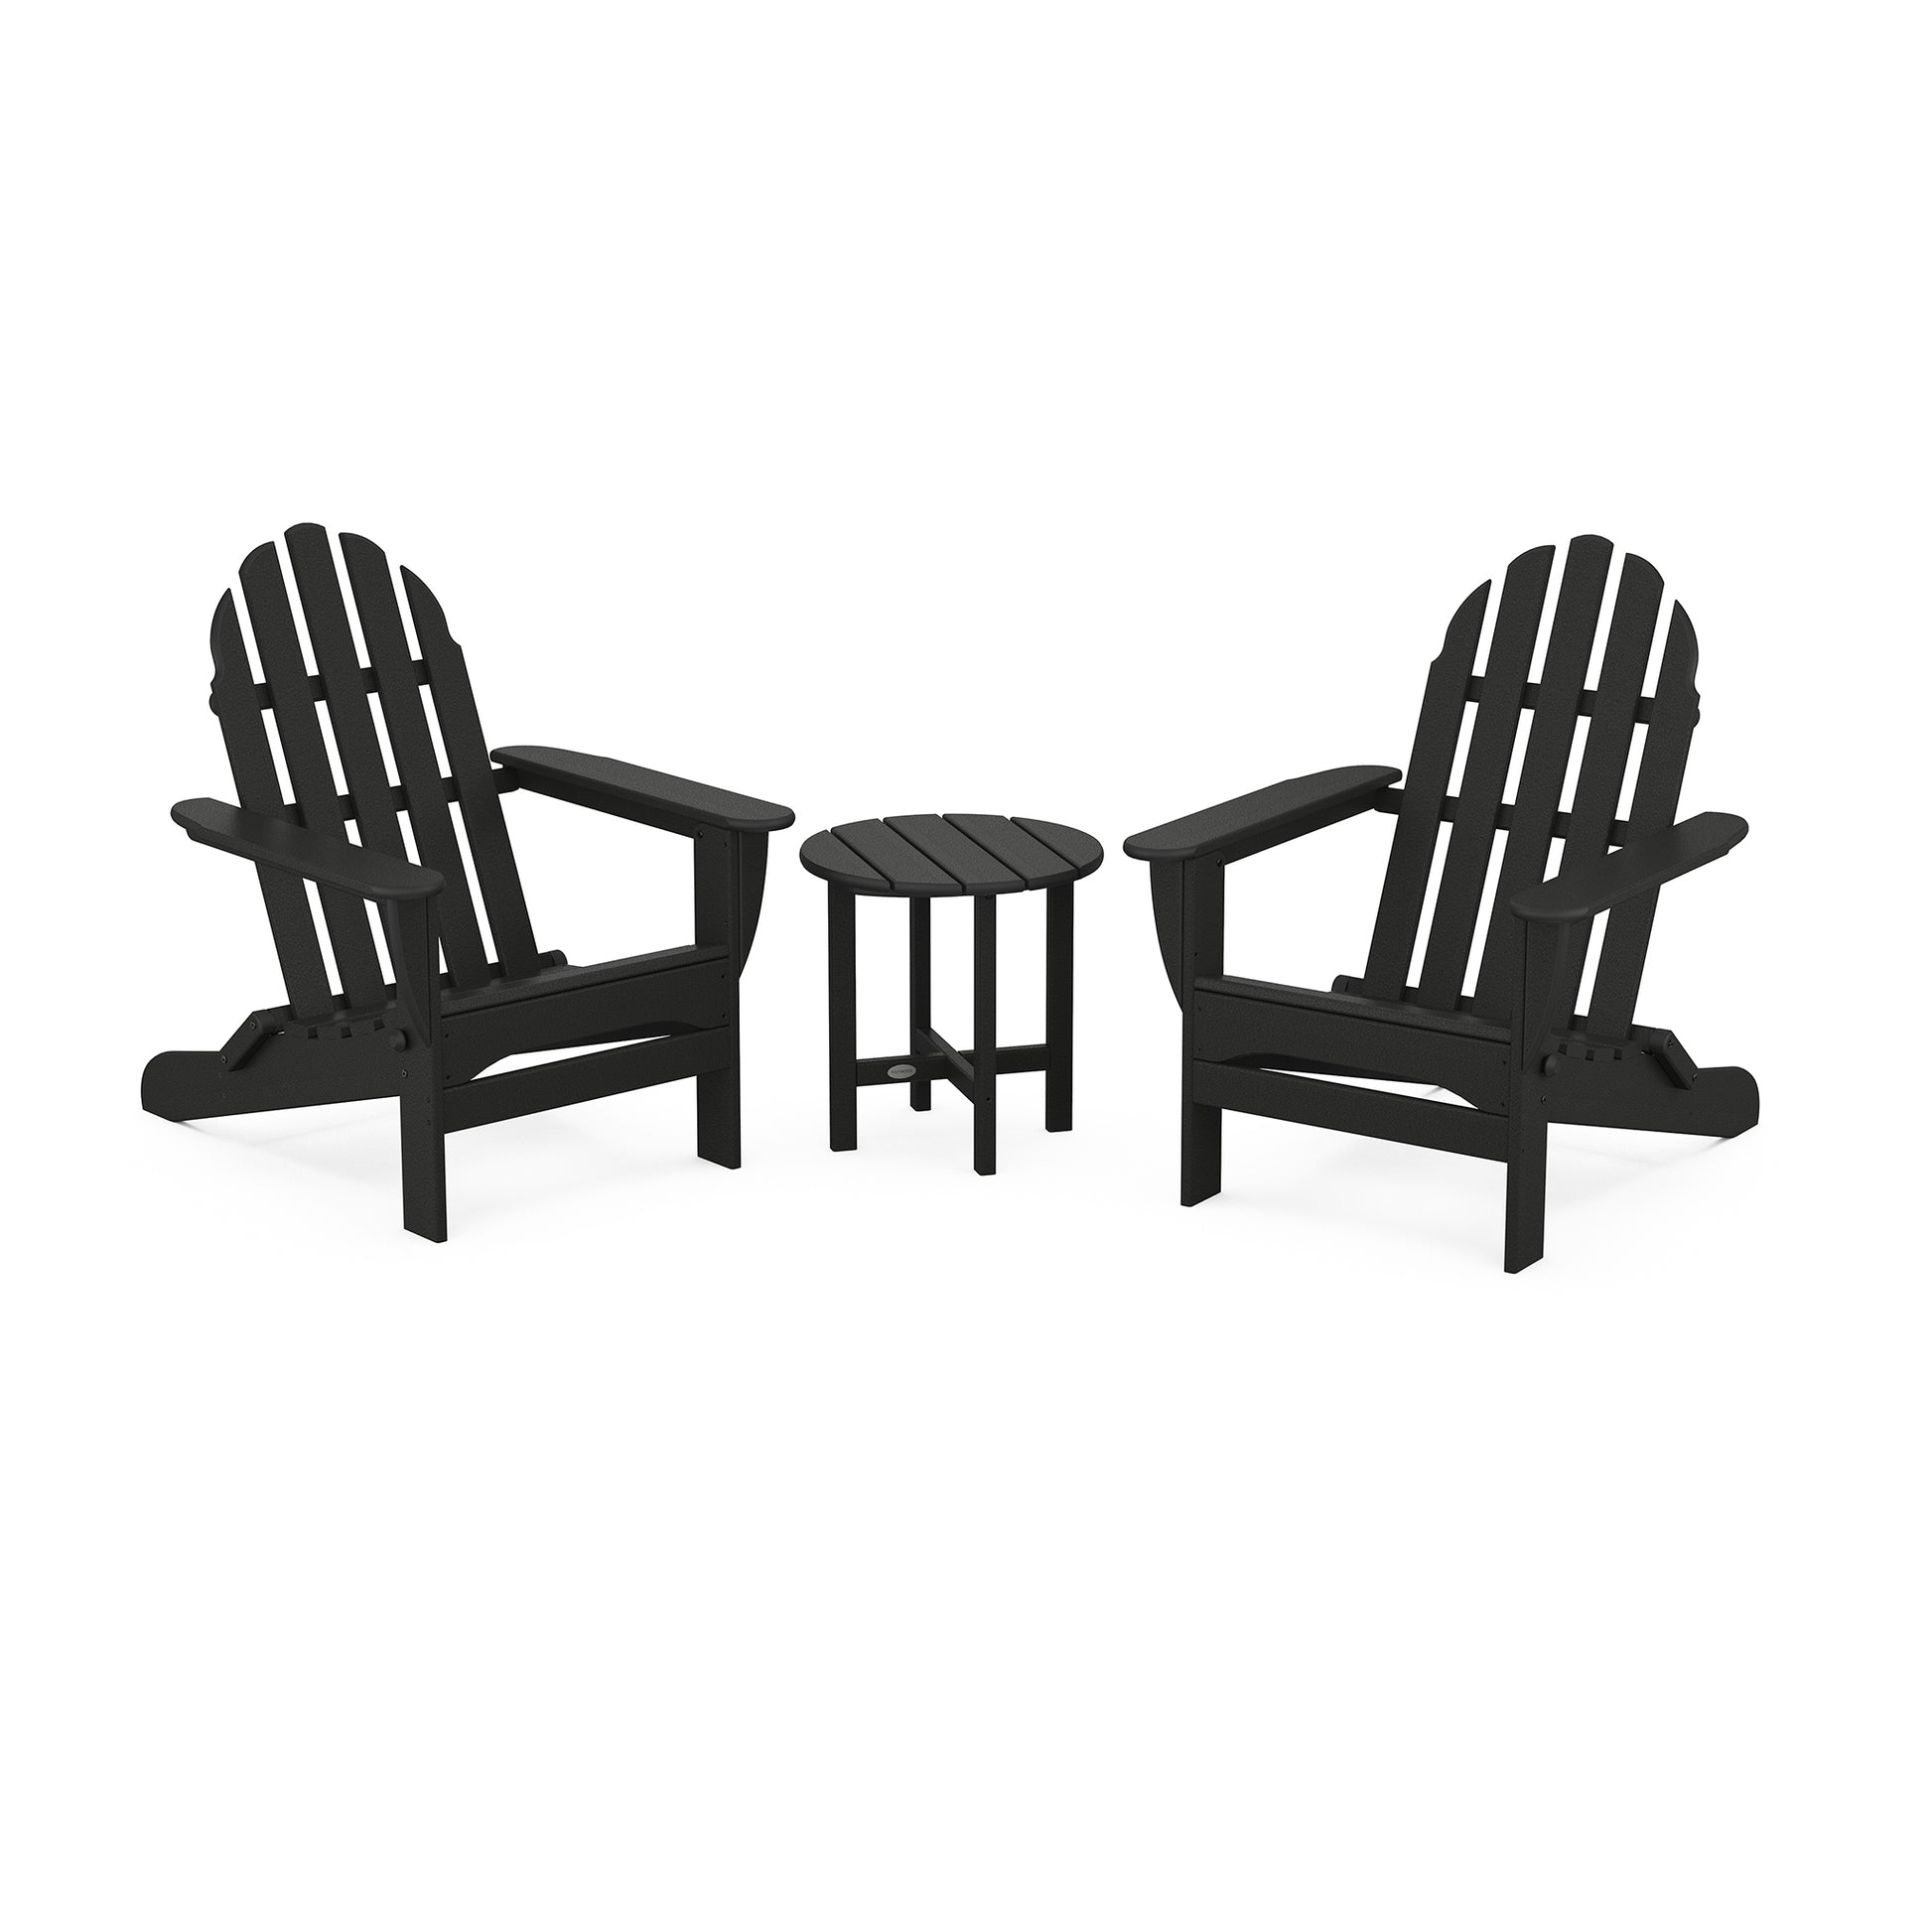 Two black POLYWOOD Classic Folding Adirondack chairs facing each other with a small round table between them, set against a white background.